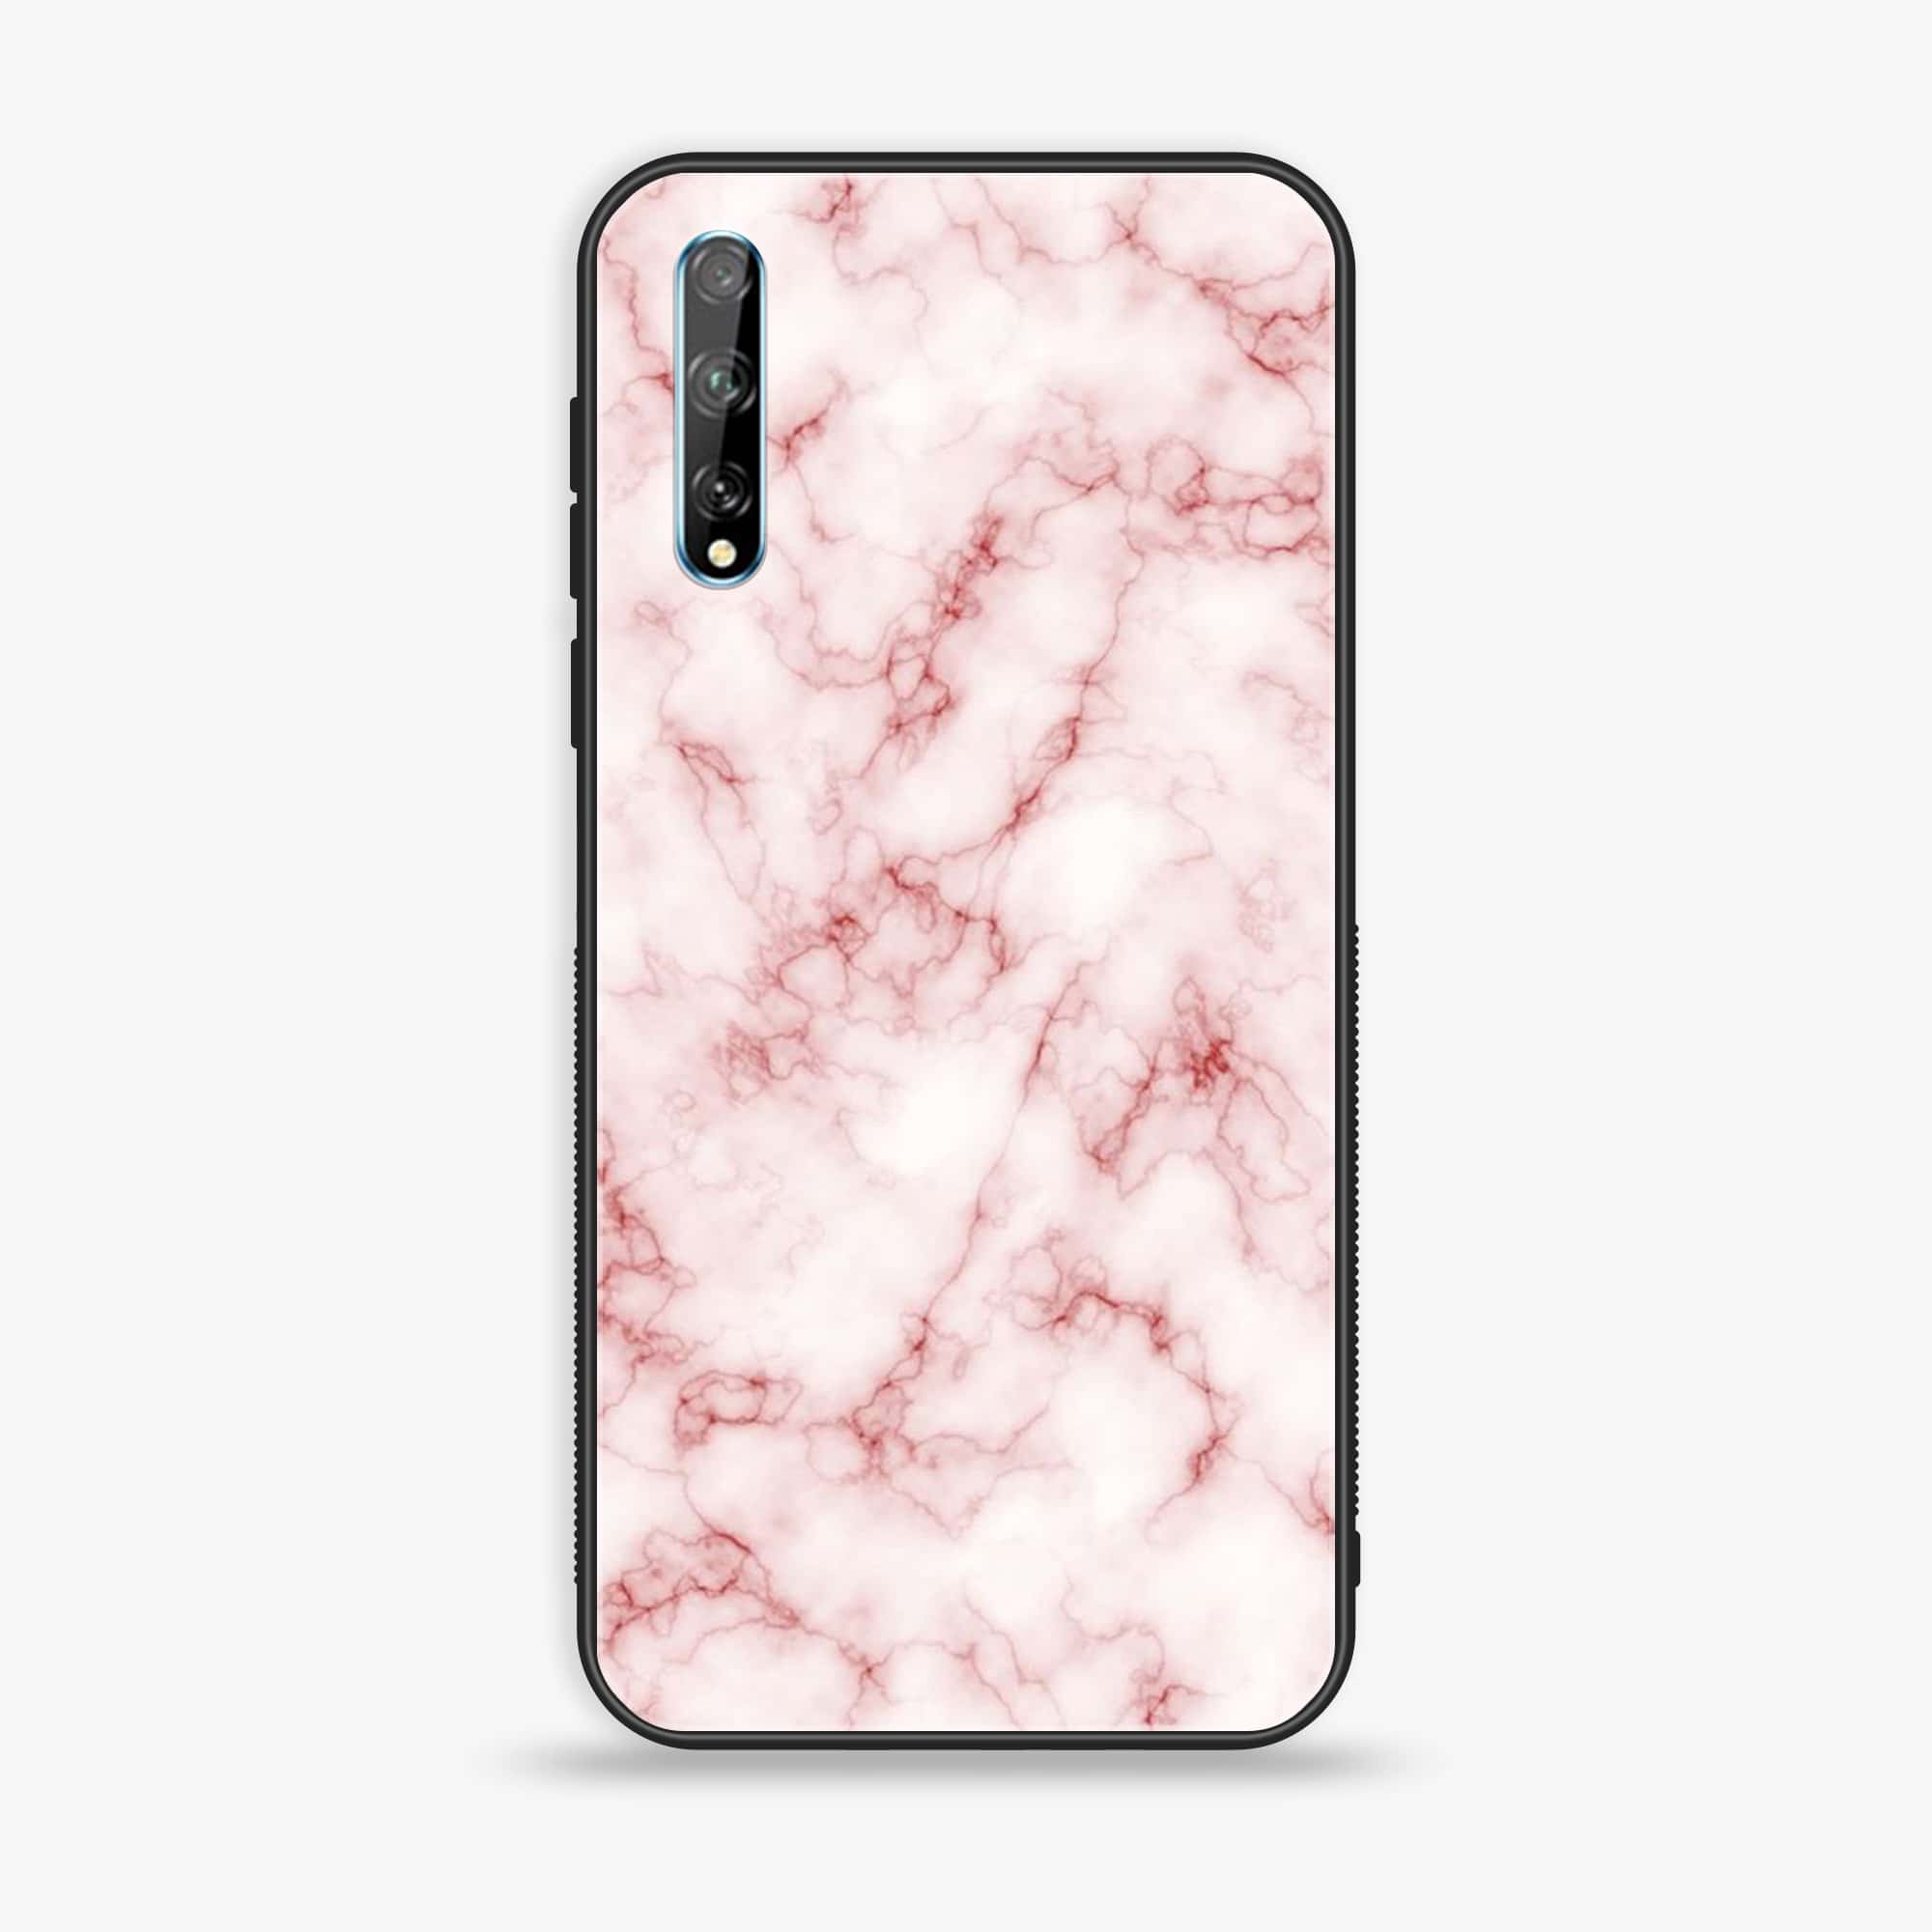 Huawei Y8p - Pink Marble Series - Premium Printed Glass soft Bumper shock Proof Case